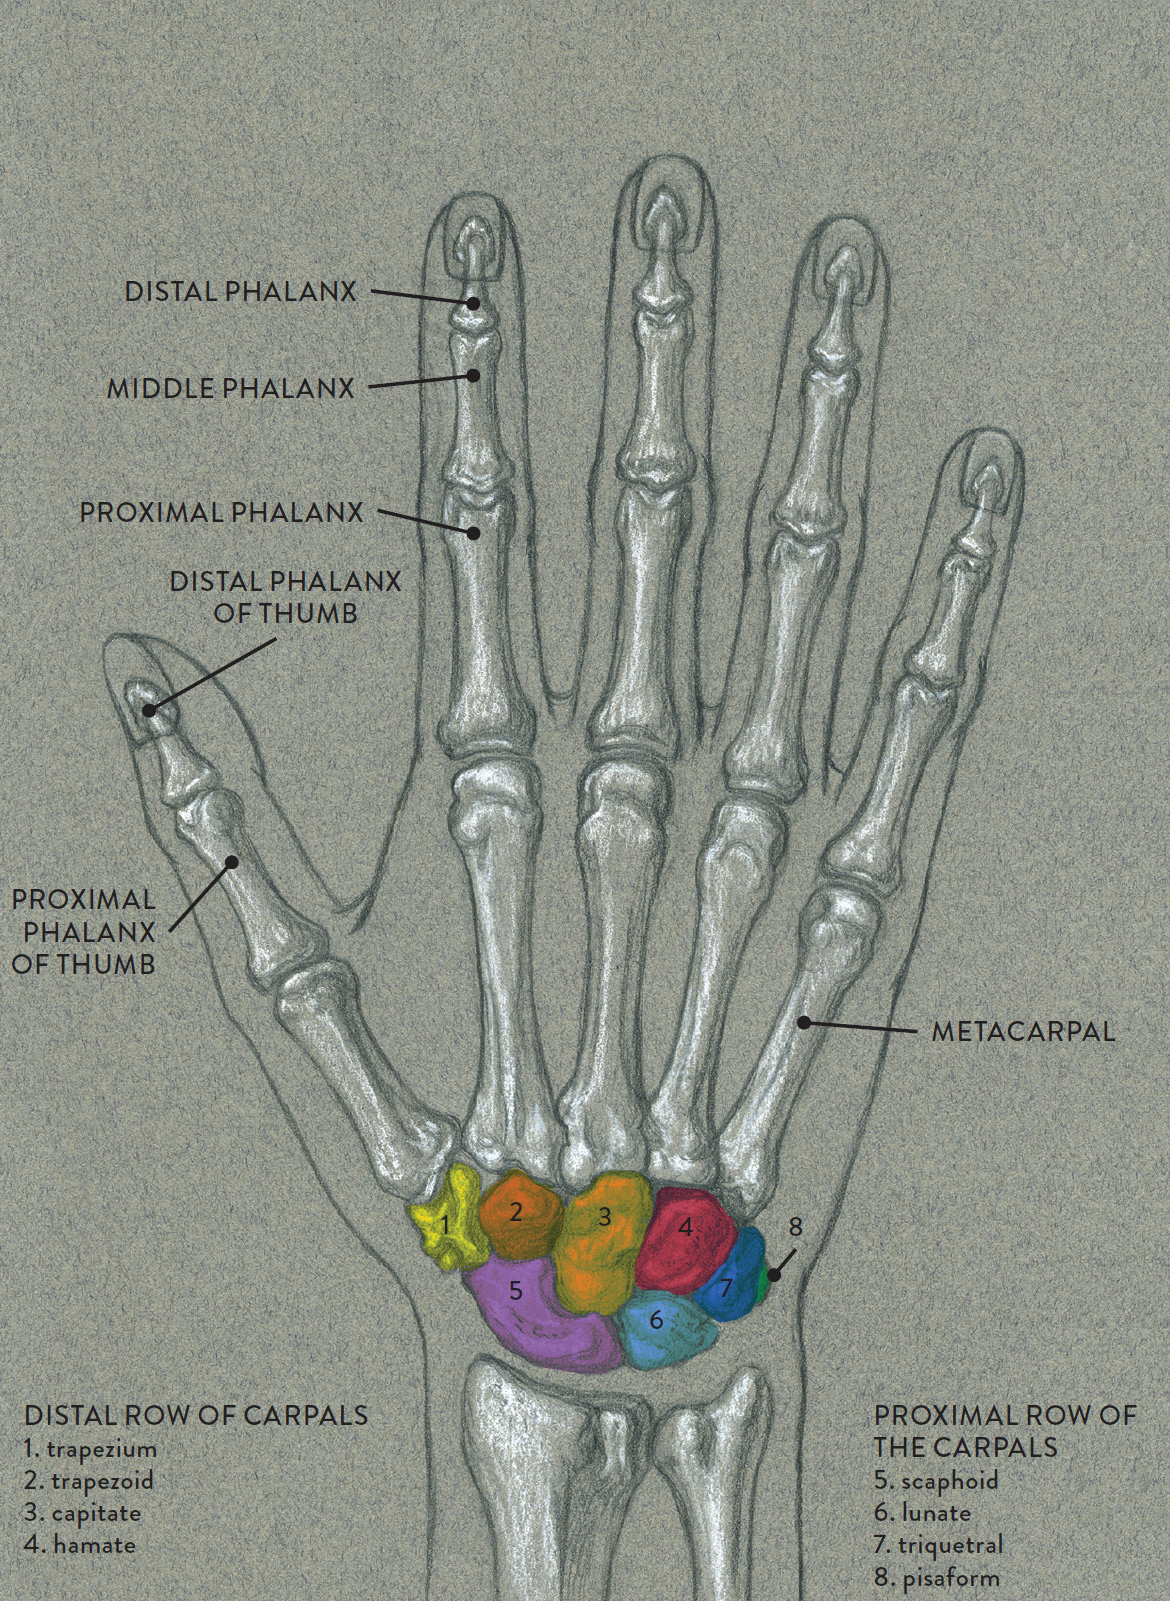 Right hand, dorsal surface